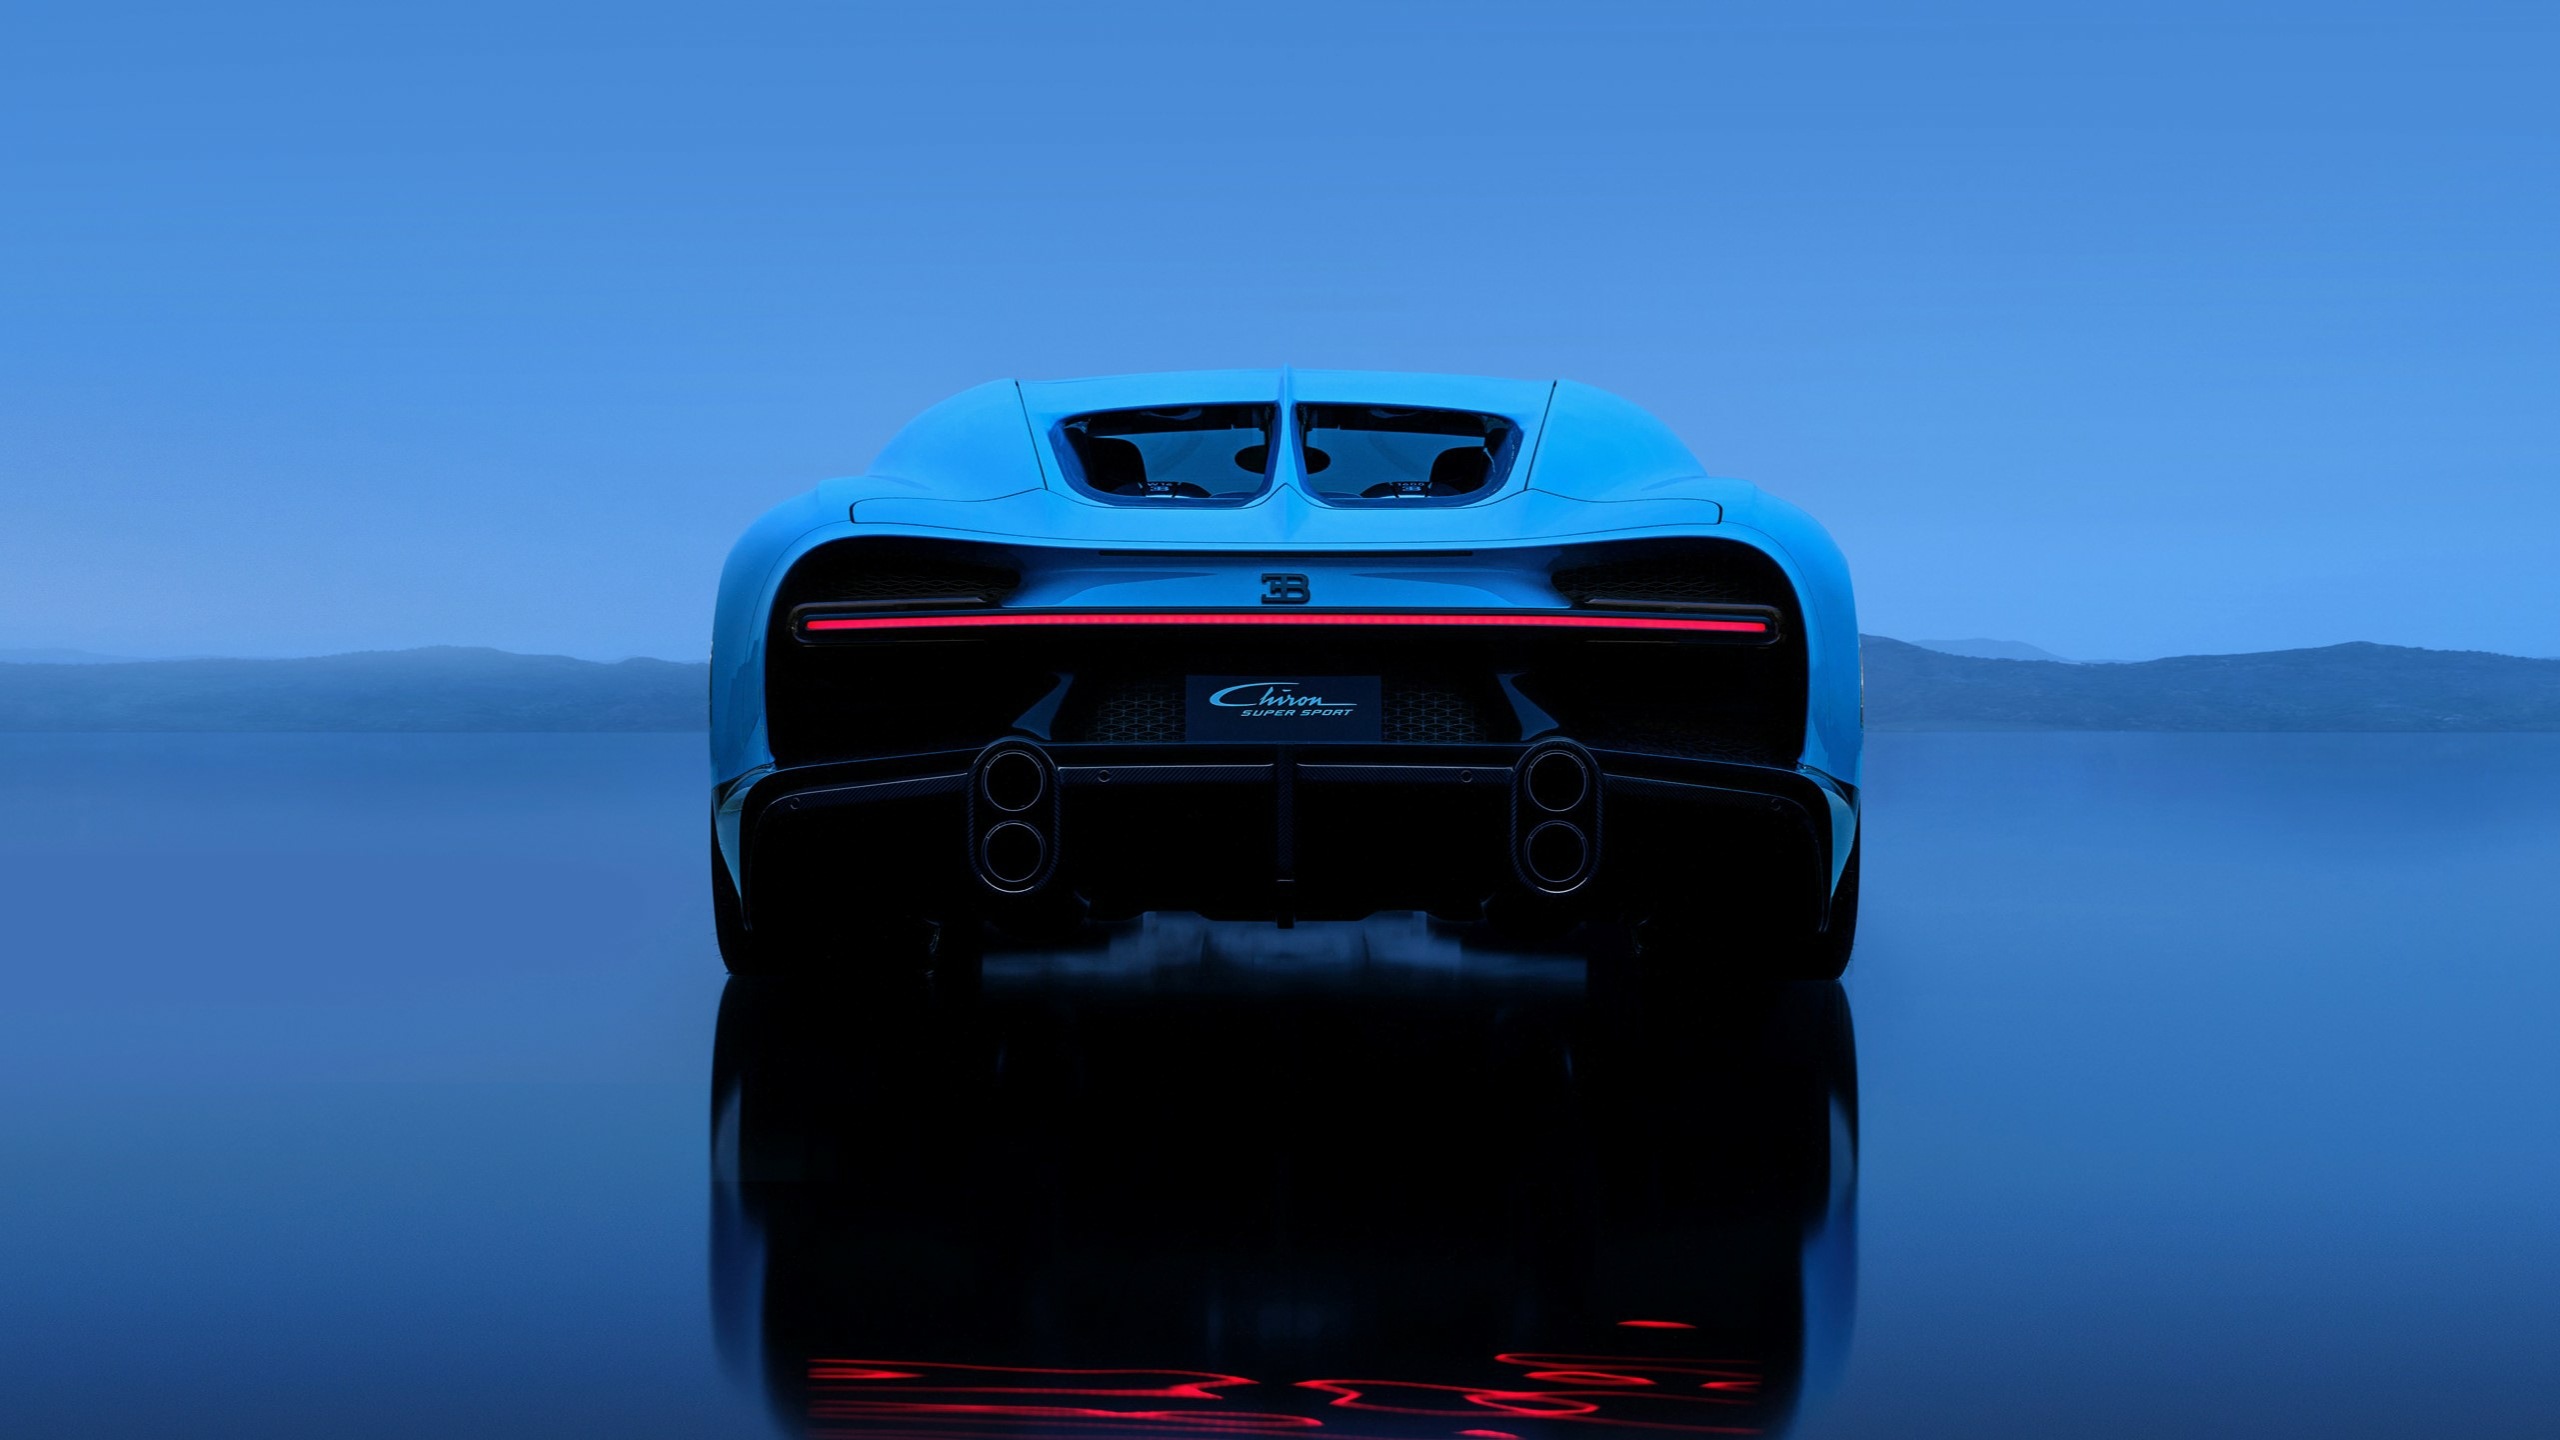 Rear View Of A Bugatti L’Ultime Super Sport In A Fade Of French Racing Blue And Atlantic Blue